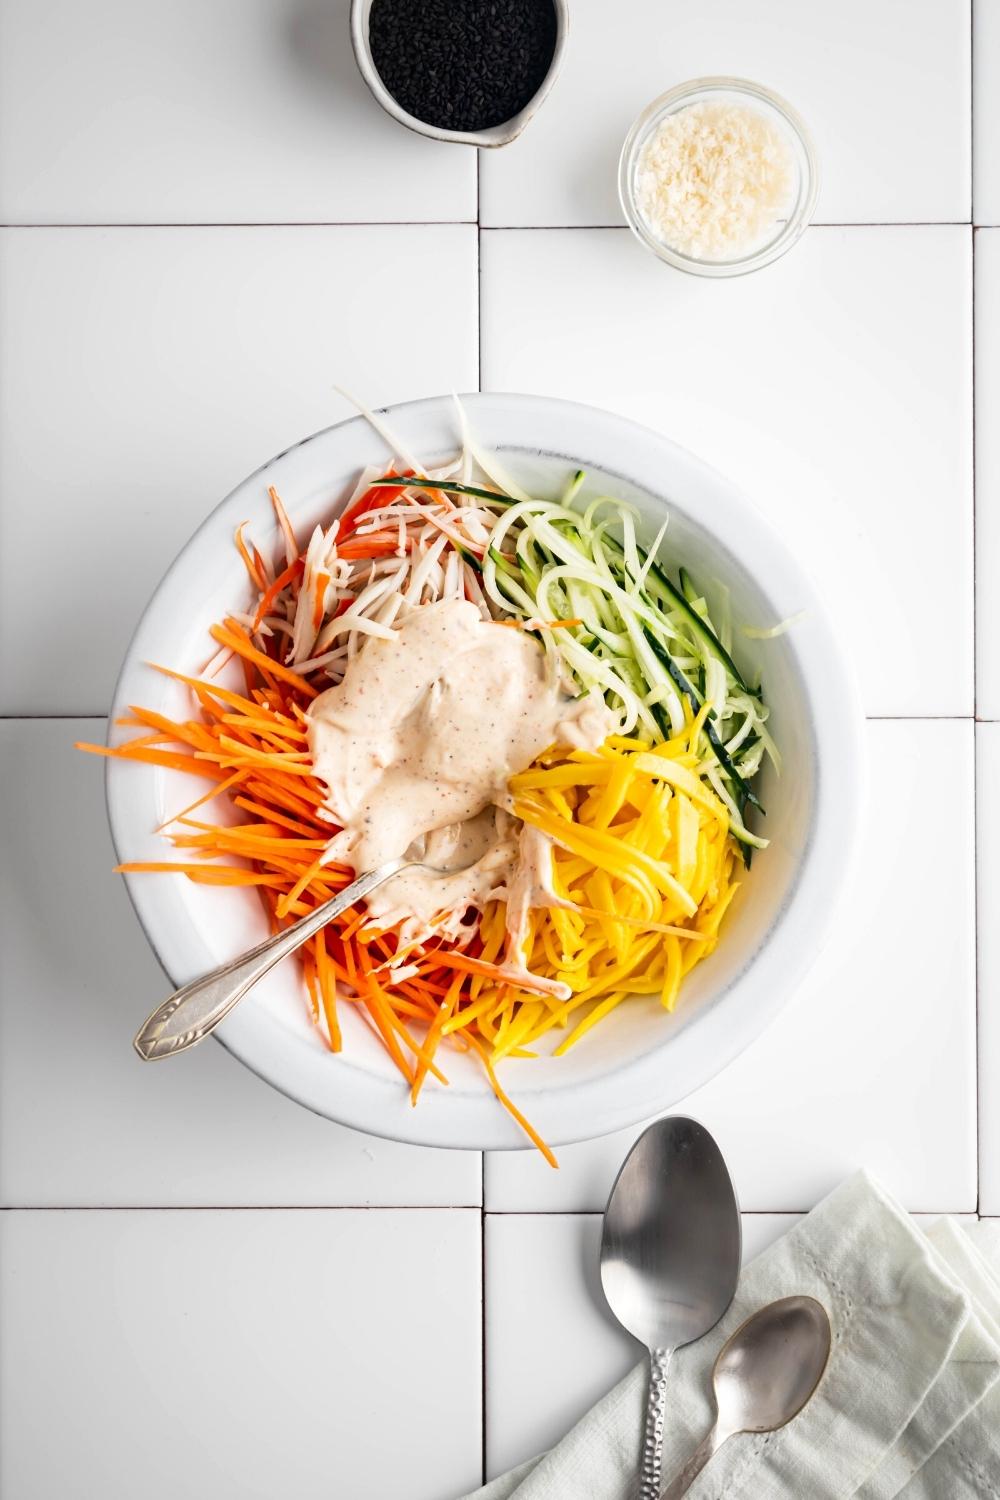 Kani salad dressing, julienned carrots, cucumber, mango, and imitation crab in a white bowl on a white tile counter.